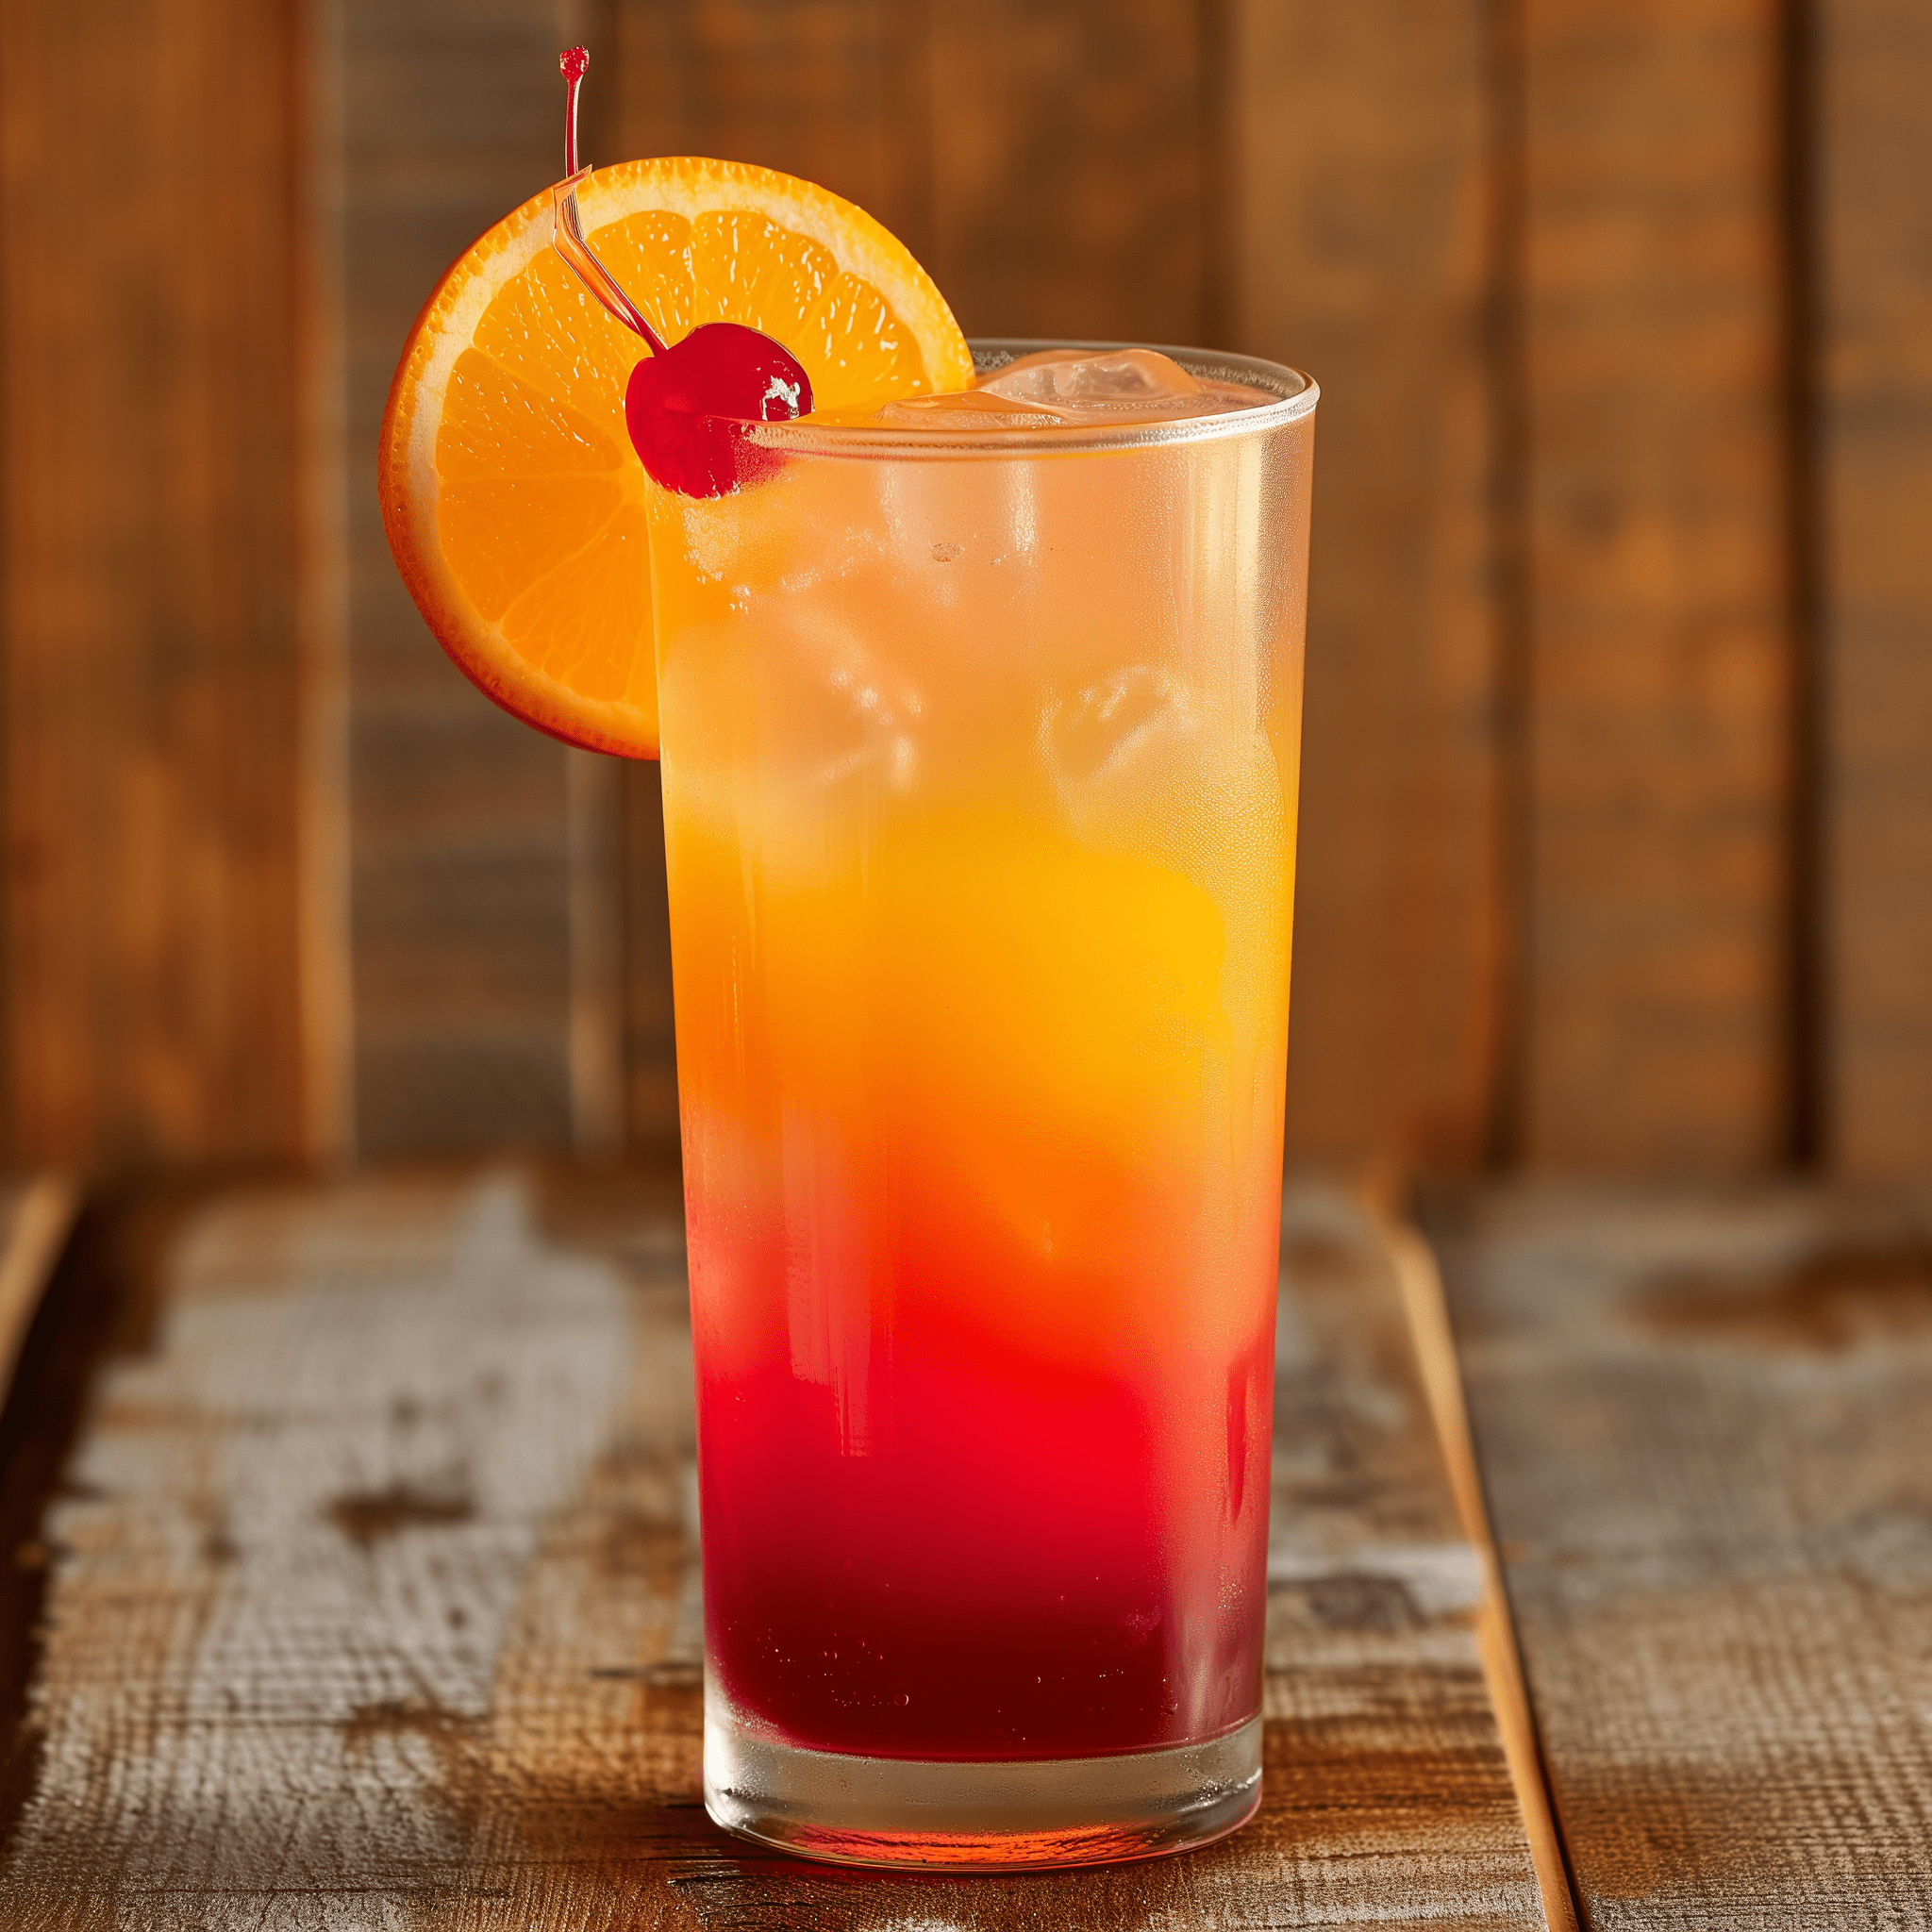 Kentucky Sunrise Cocktail Recipe - The Kentucky Sunrise offers a harmonious blend of sweet and tangy flavors. The bourbon provides a warm, oaky backbone, while the orange juice adds a fresh, fruity zest. The grenadine delivers a syrupy sweetness that rounds out the drink, making it both refreshing and indulgent.